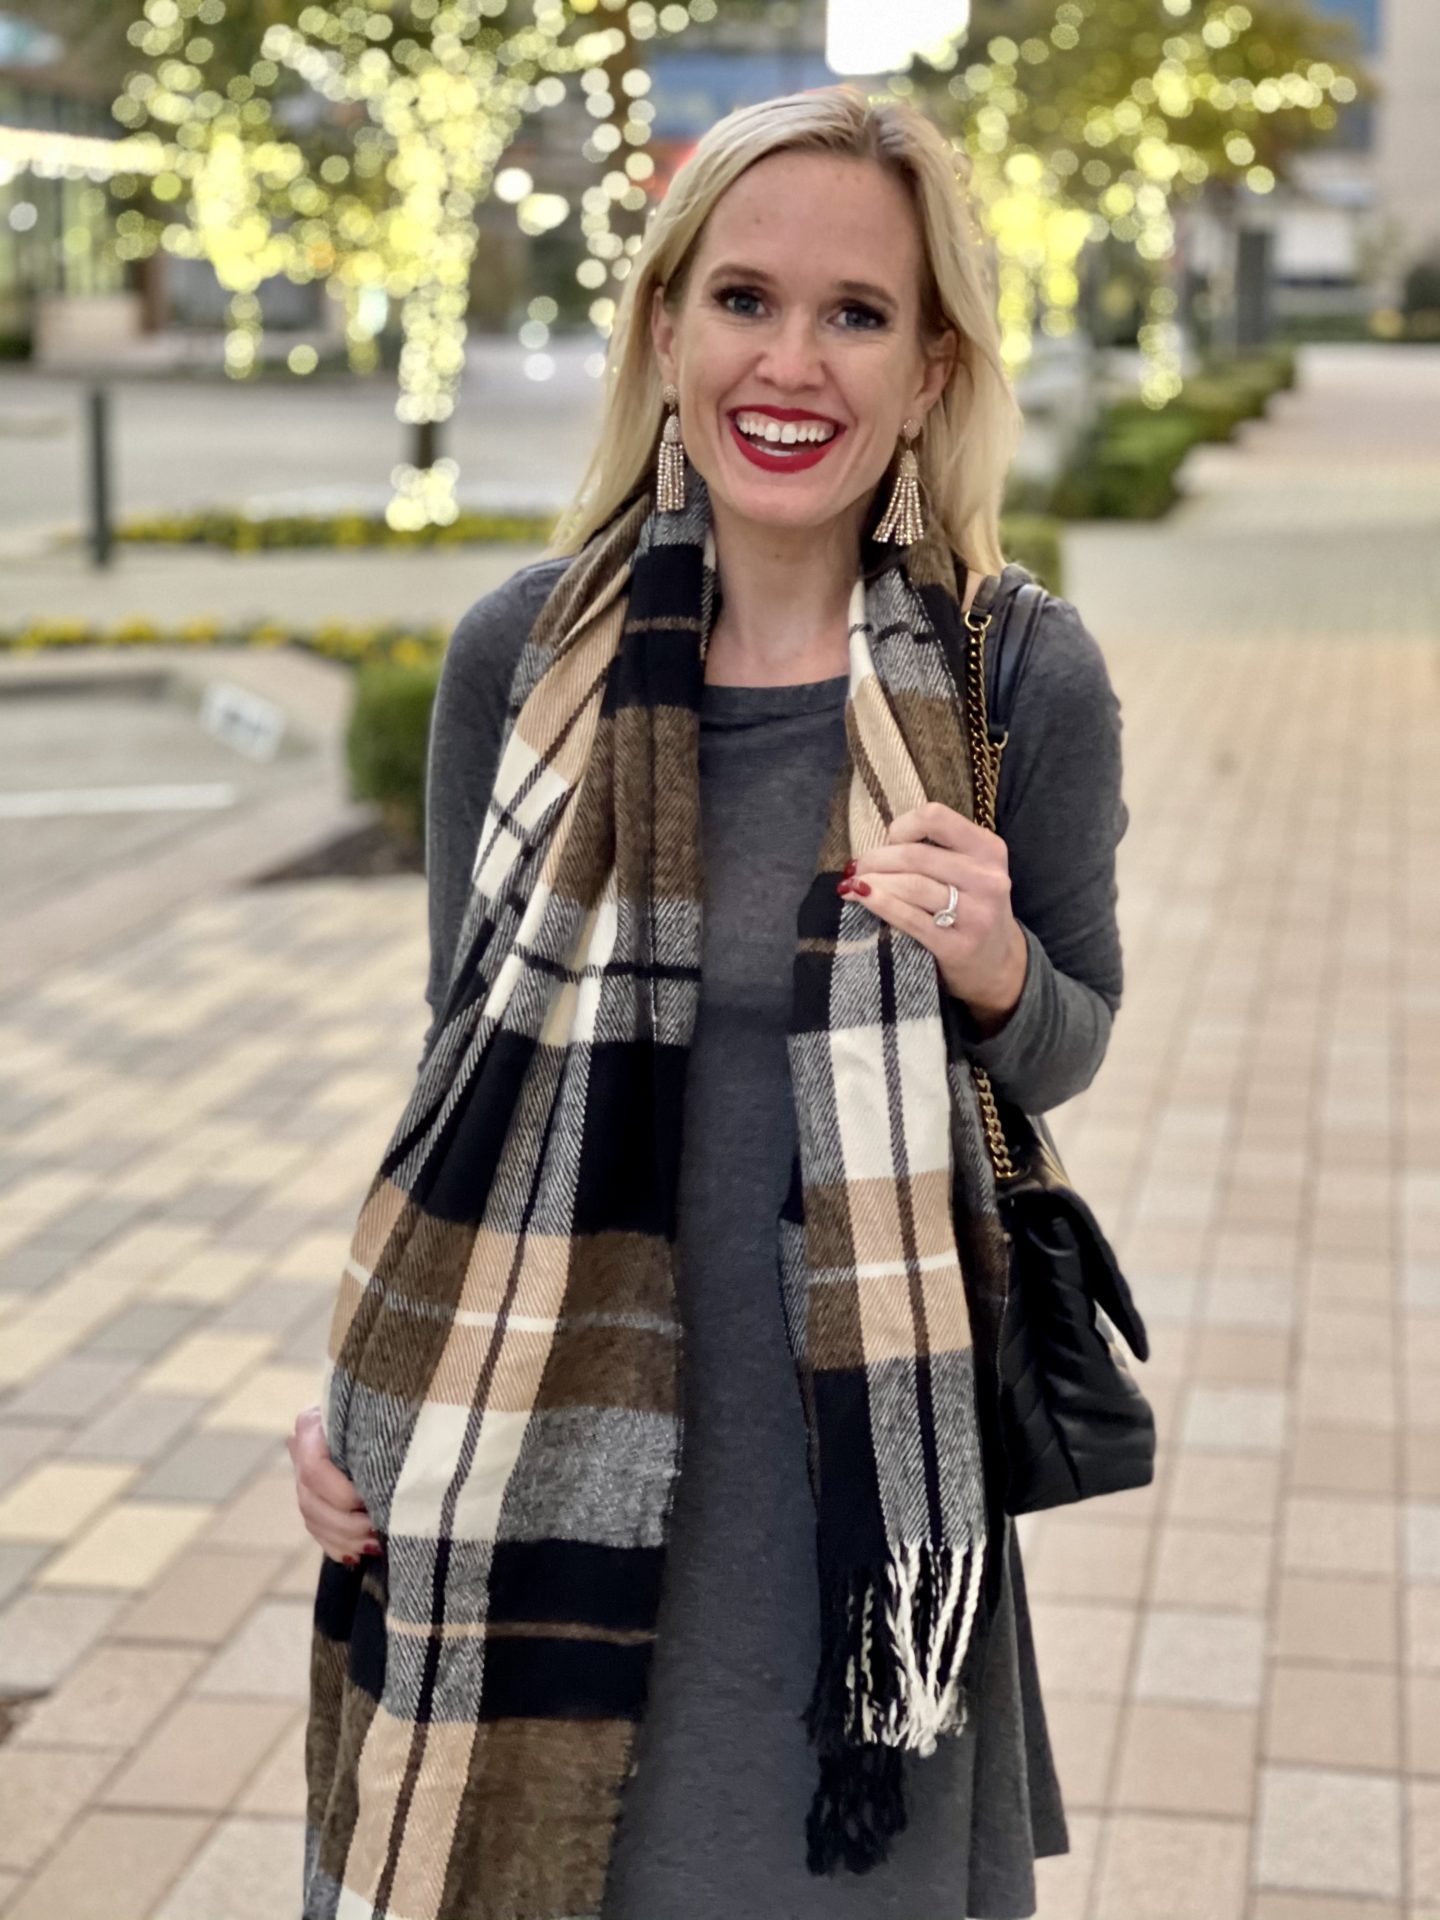 12 Thanksgiving Outfit Ideas | Affordable Holiday Styles | Dress and scarf